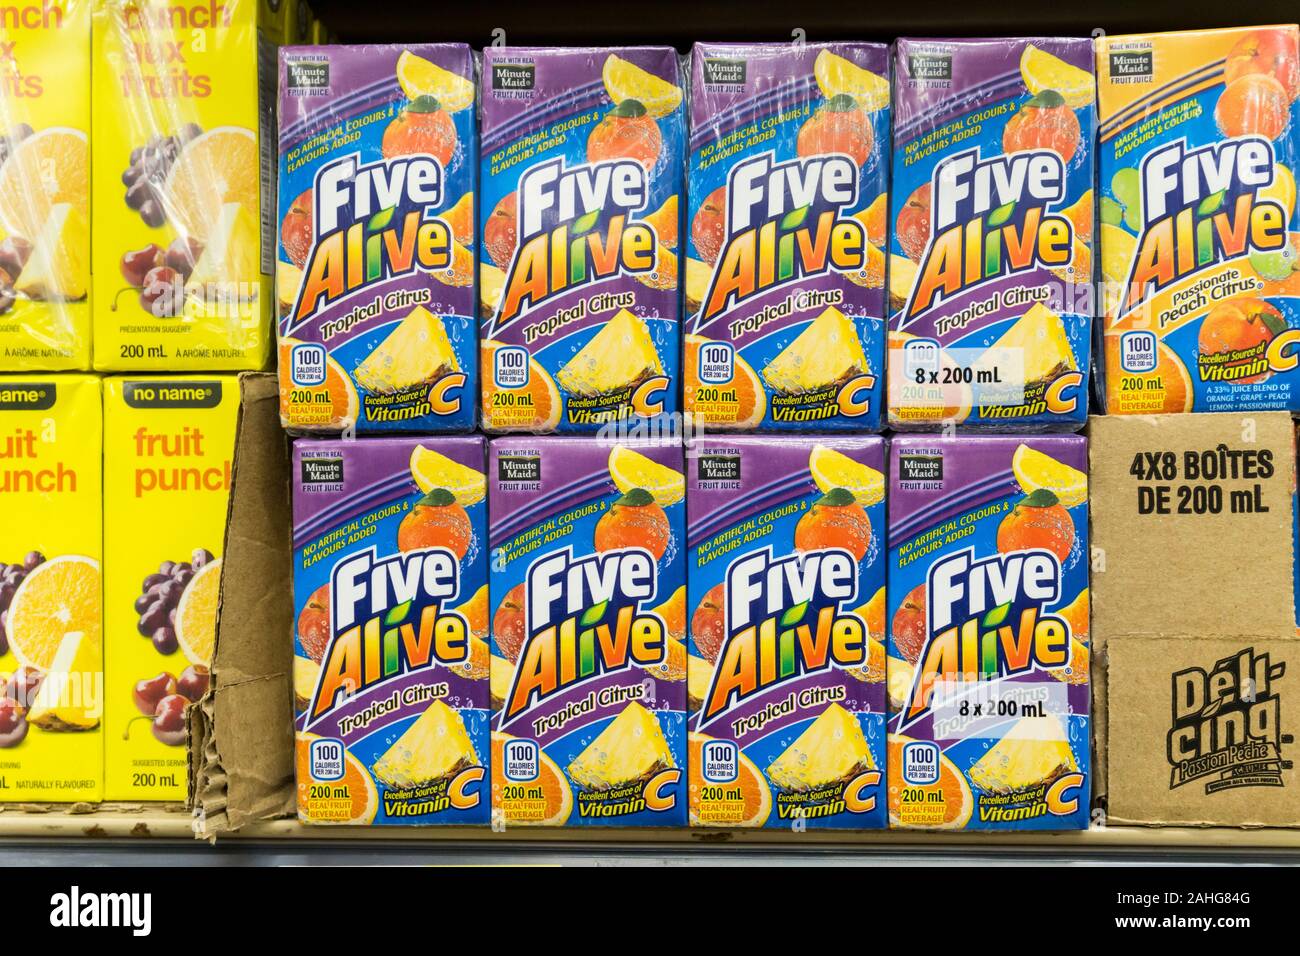 Tetra pak cartons of Five Alive Tropical Citrus fruit juice for sale on the shelves of a Canadian supermarket. Stock Photo